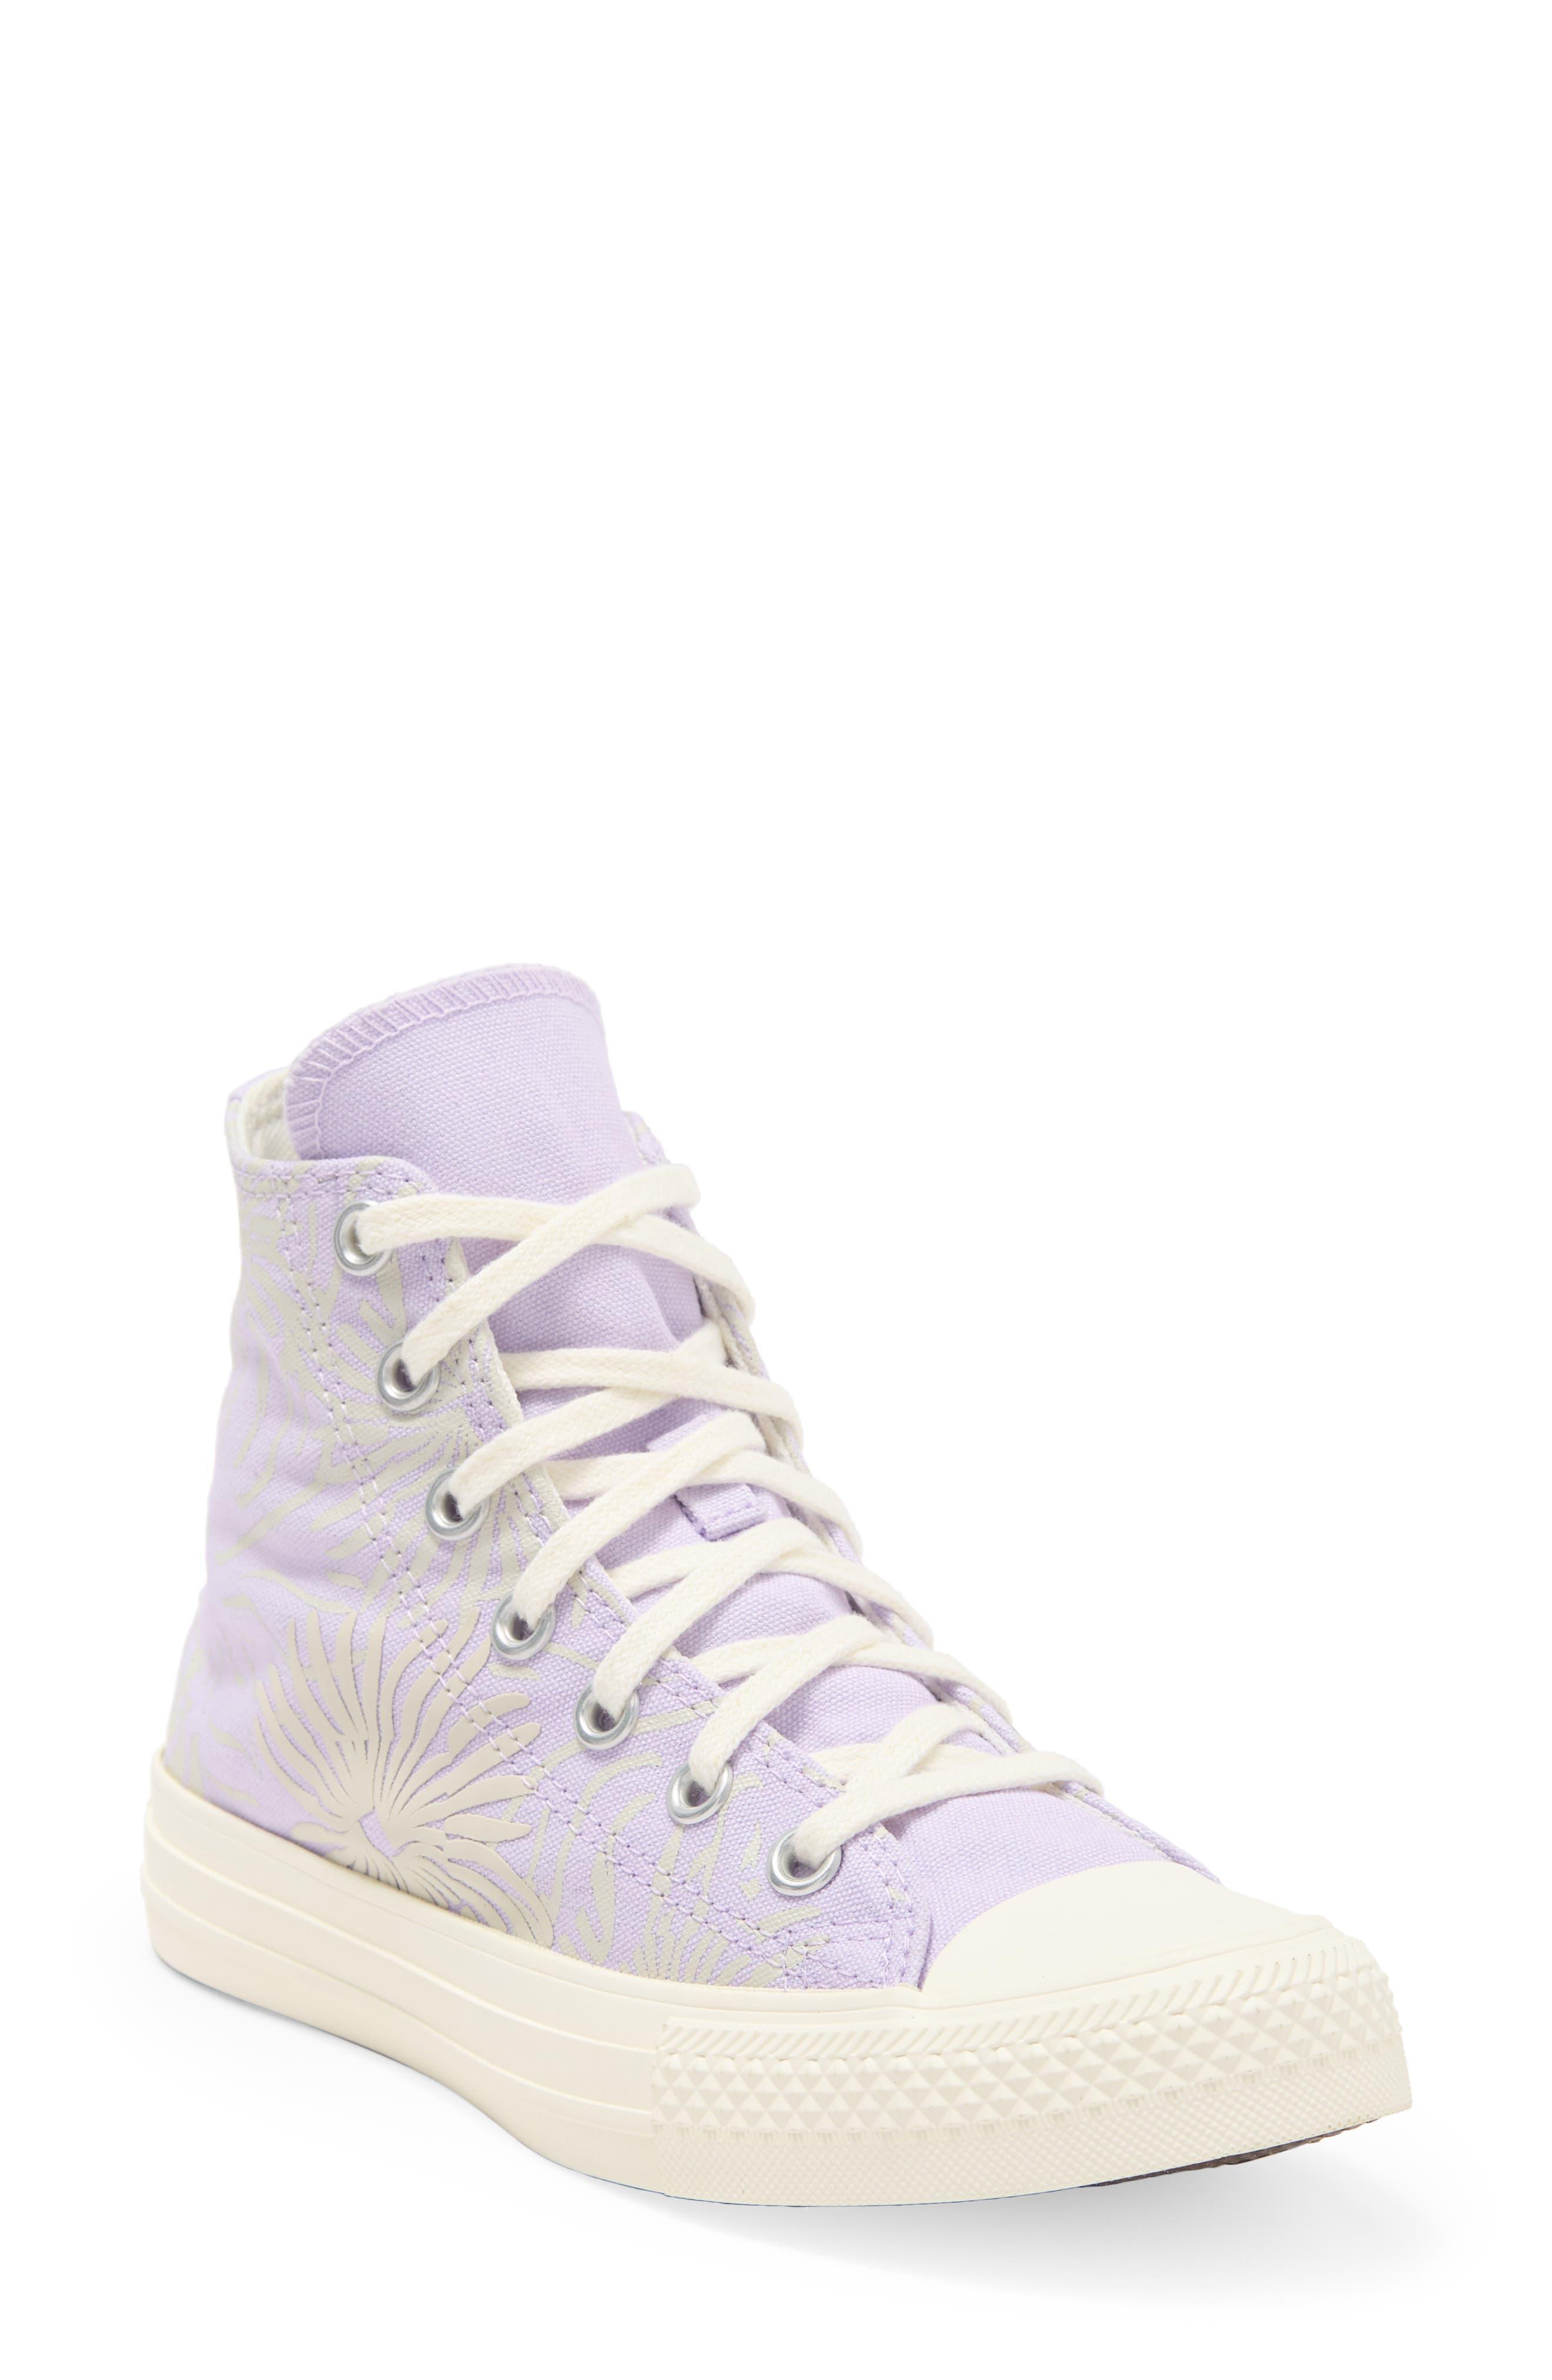 Converse Chuck Taylor® All Star® High Top Sneaker in White | Lyst